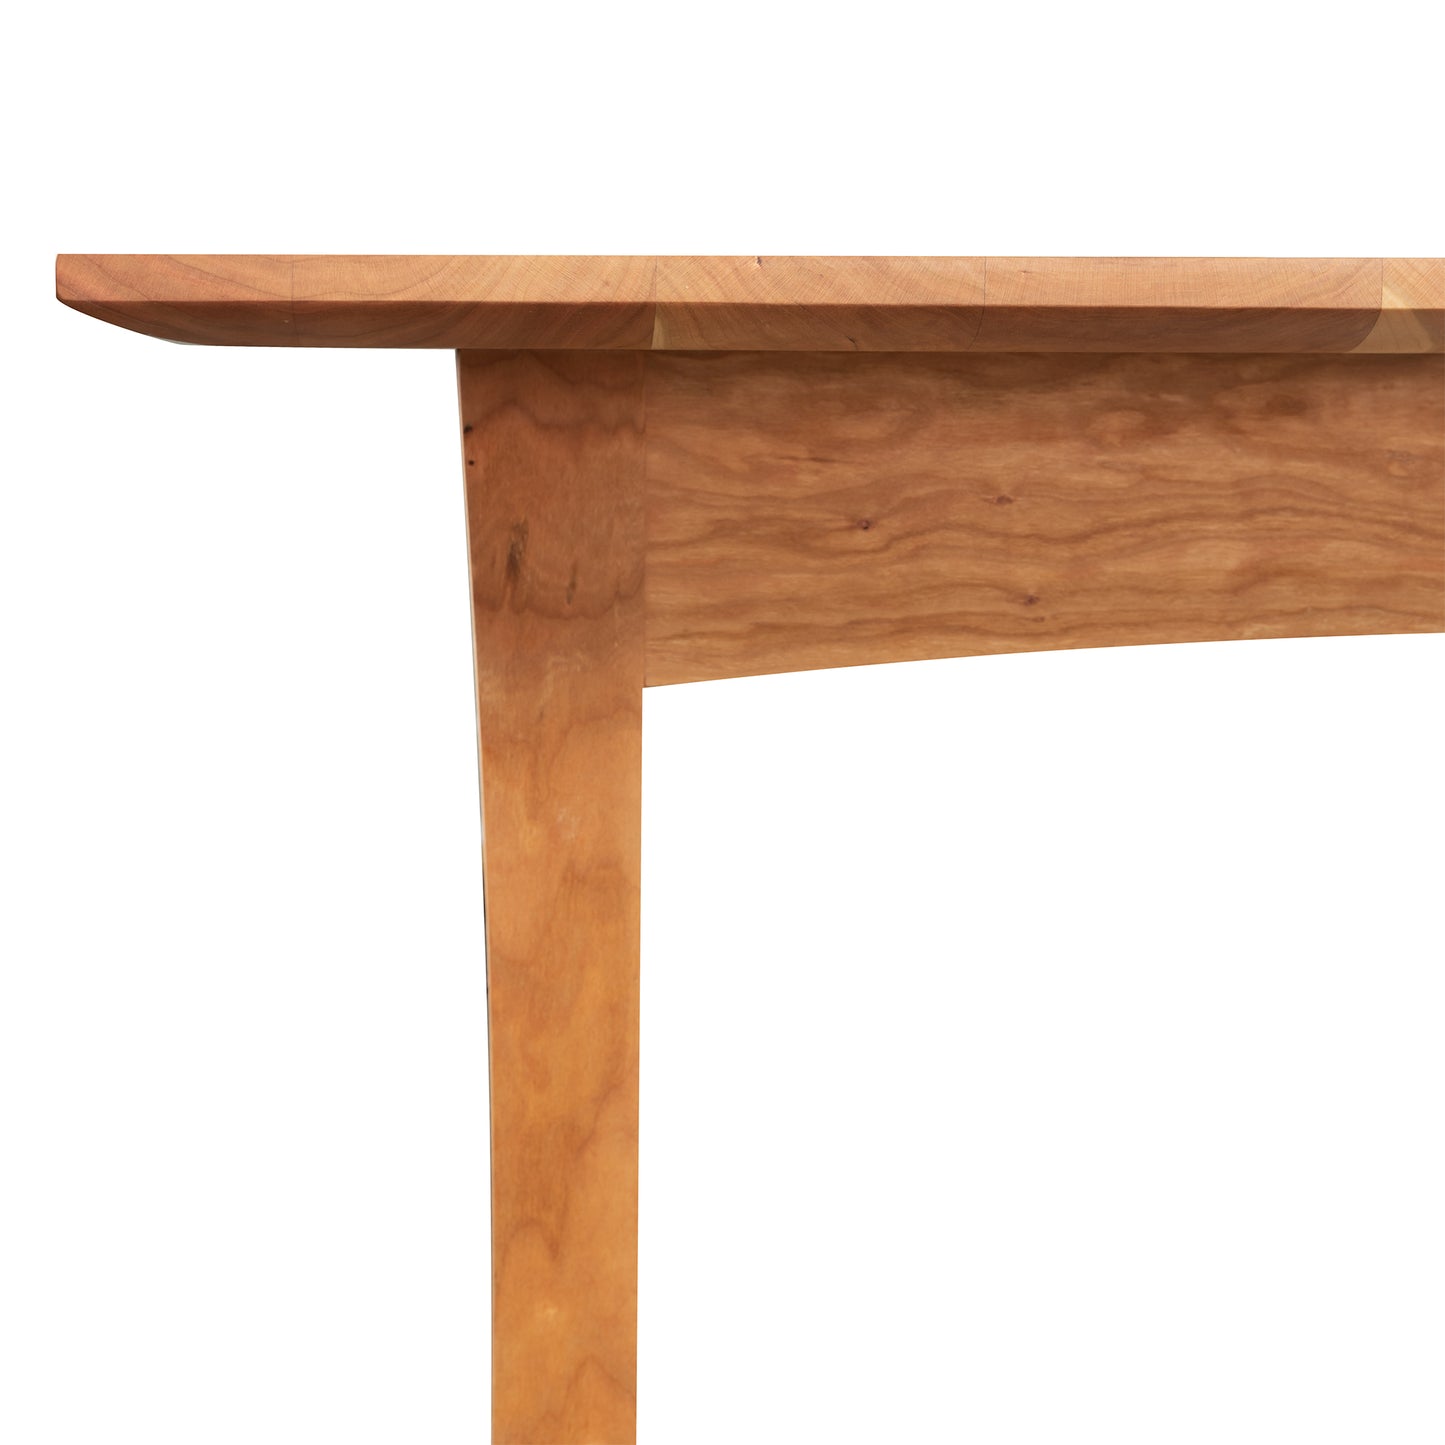 Close-up of a Vermont Furniture Designs Contemporary Craftsman Extension Dining Table corner against a white background, crafted by Vermont woodworkers.